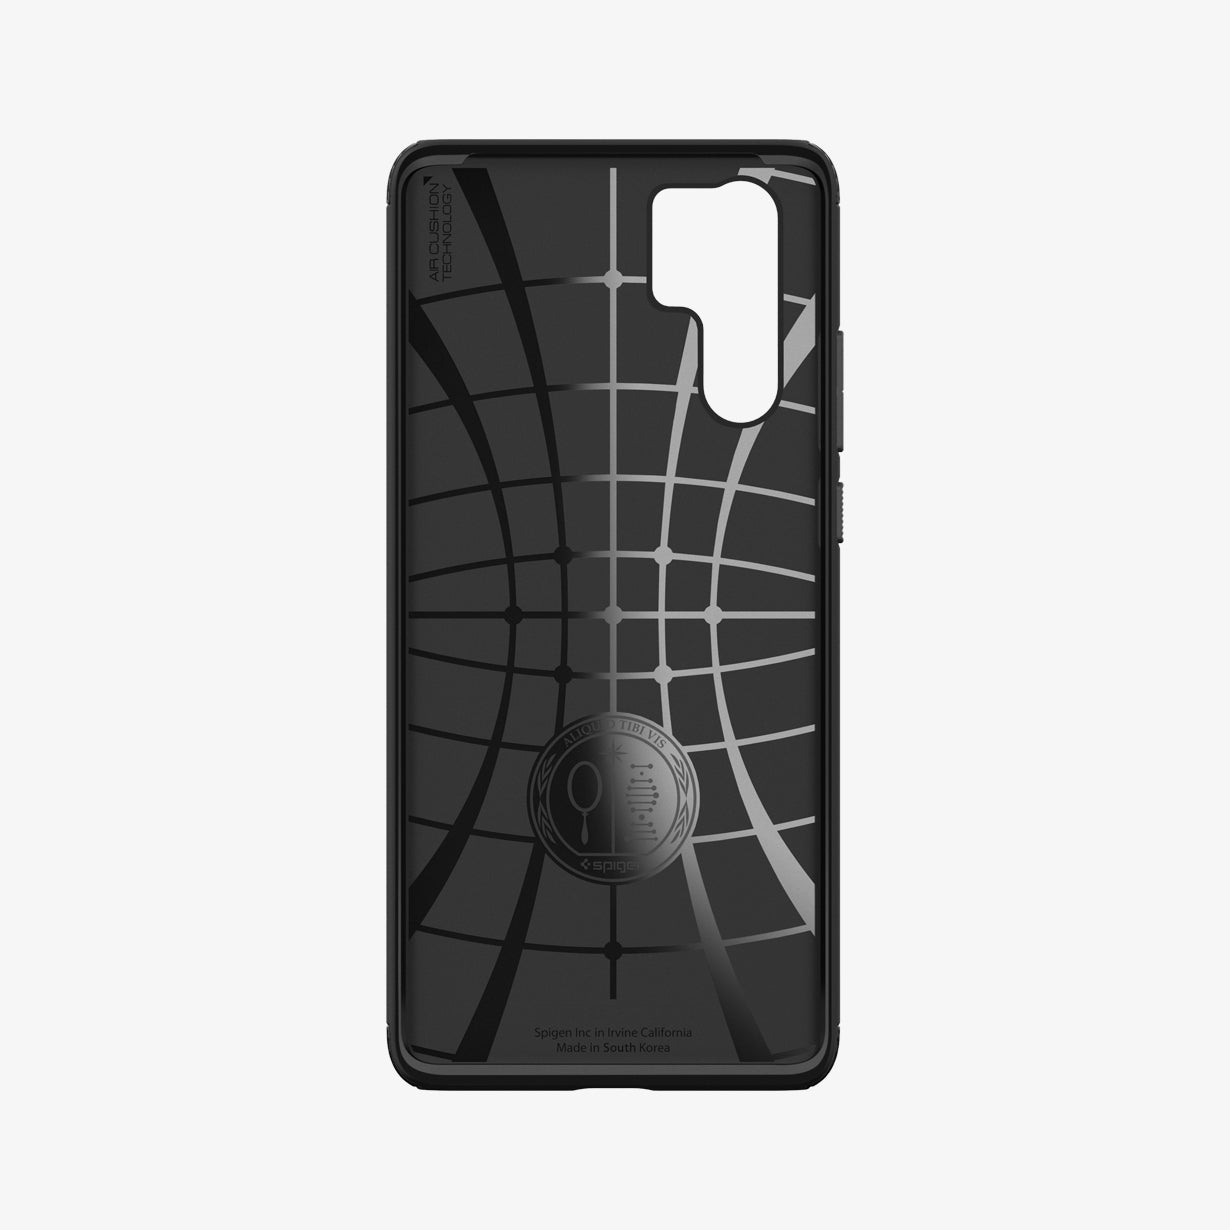 L37CS25725 - Huawei P30 Pro Case Rugged Armor in black showing the inside of case